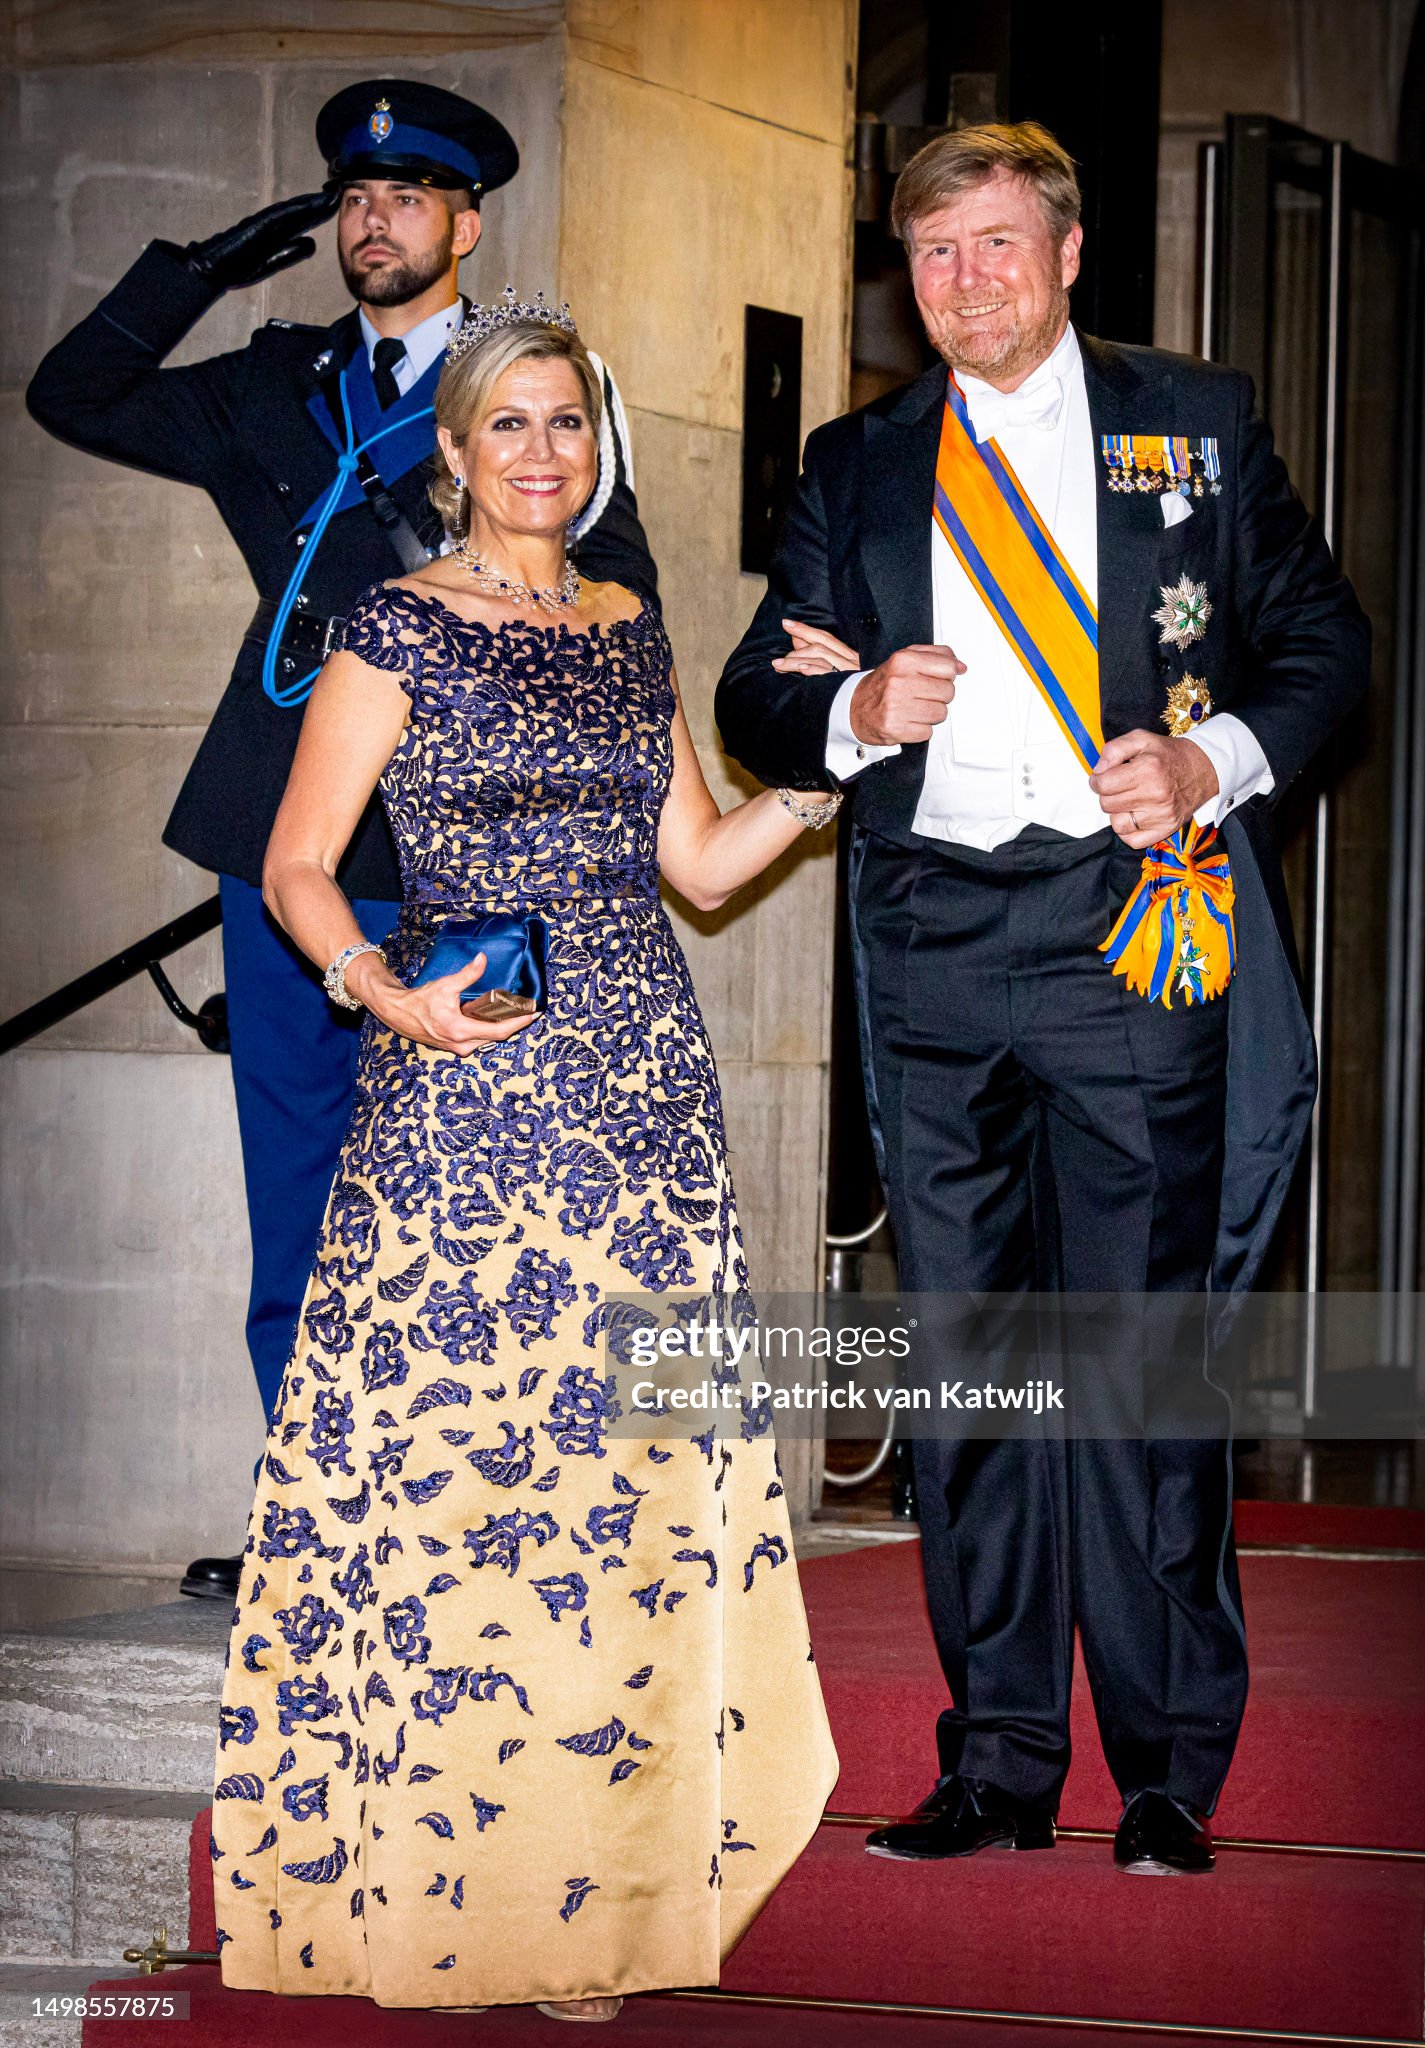 CASA REAL HOLANDESA - Página 94 Queen-m%C3%A1xima-of-the-netherlands-and-king-willem-alexander-of-the-netherlands-attend-the